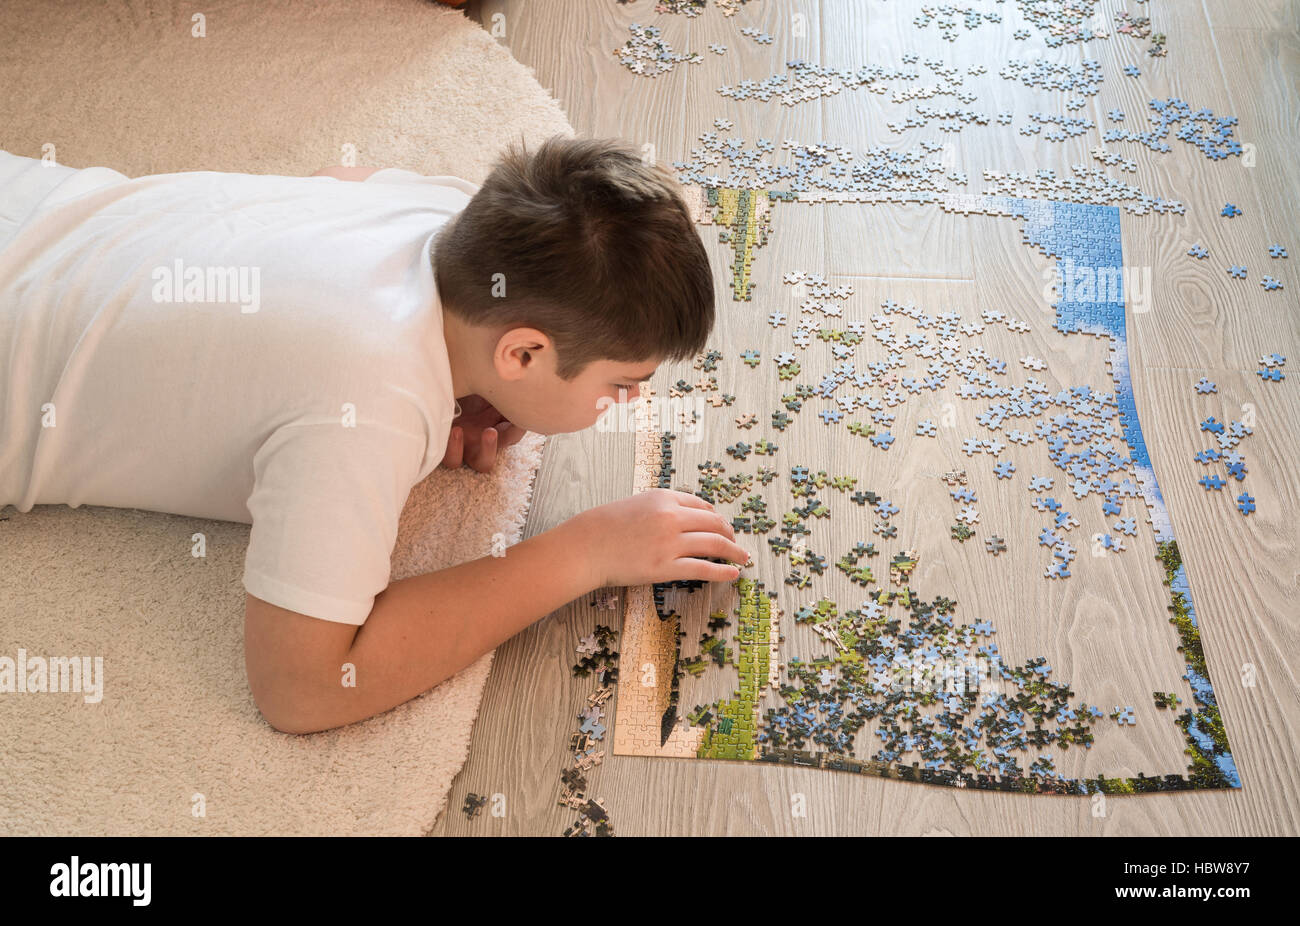 Teen boy collects a puzzle lying on carpet Stock Photo